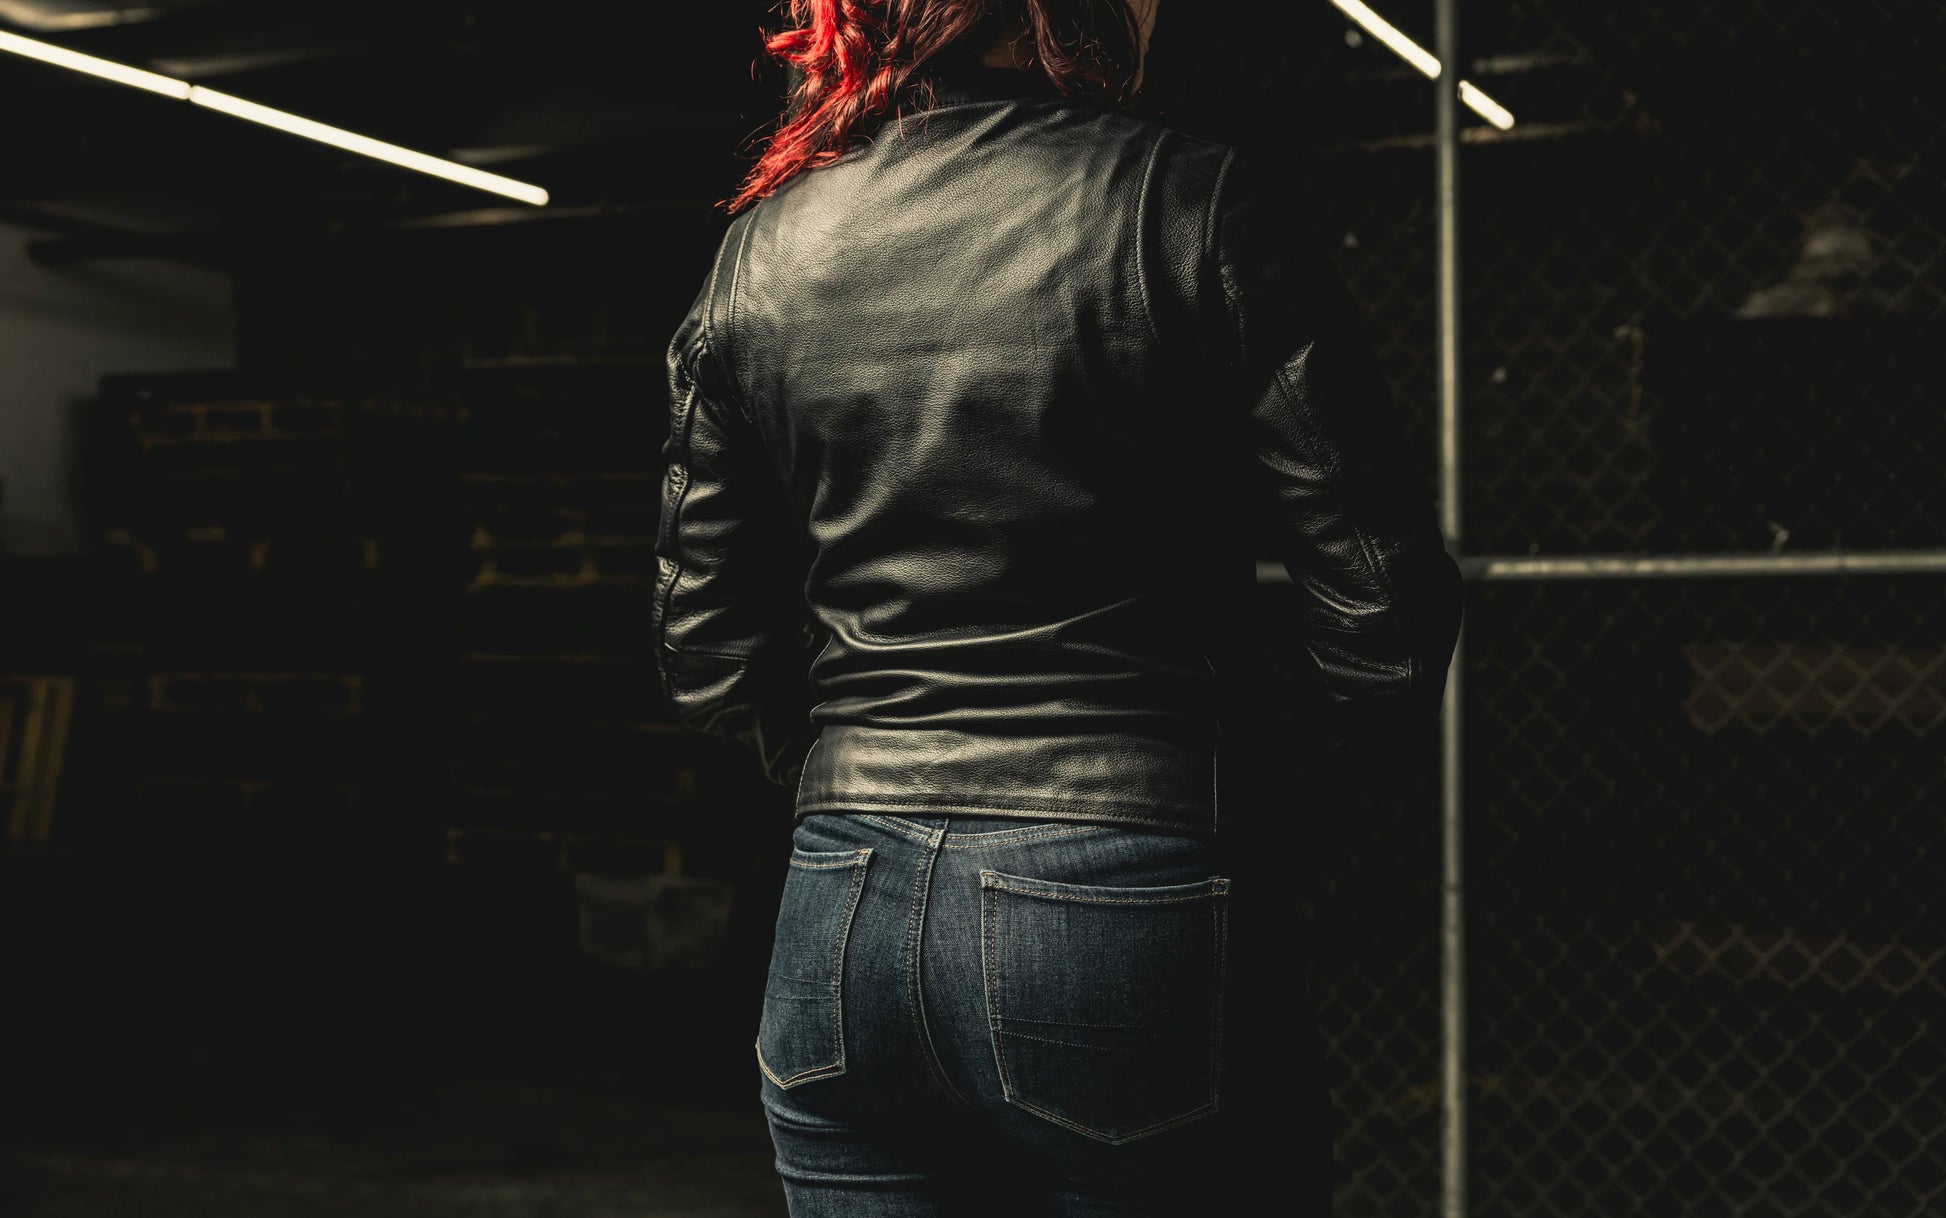  Back view of a woman wearing Flashback Leather Motorcycle Jacket, highlighting the design and silhouette from behind.